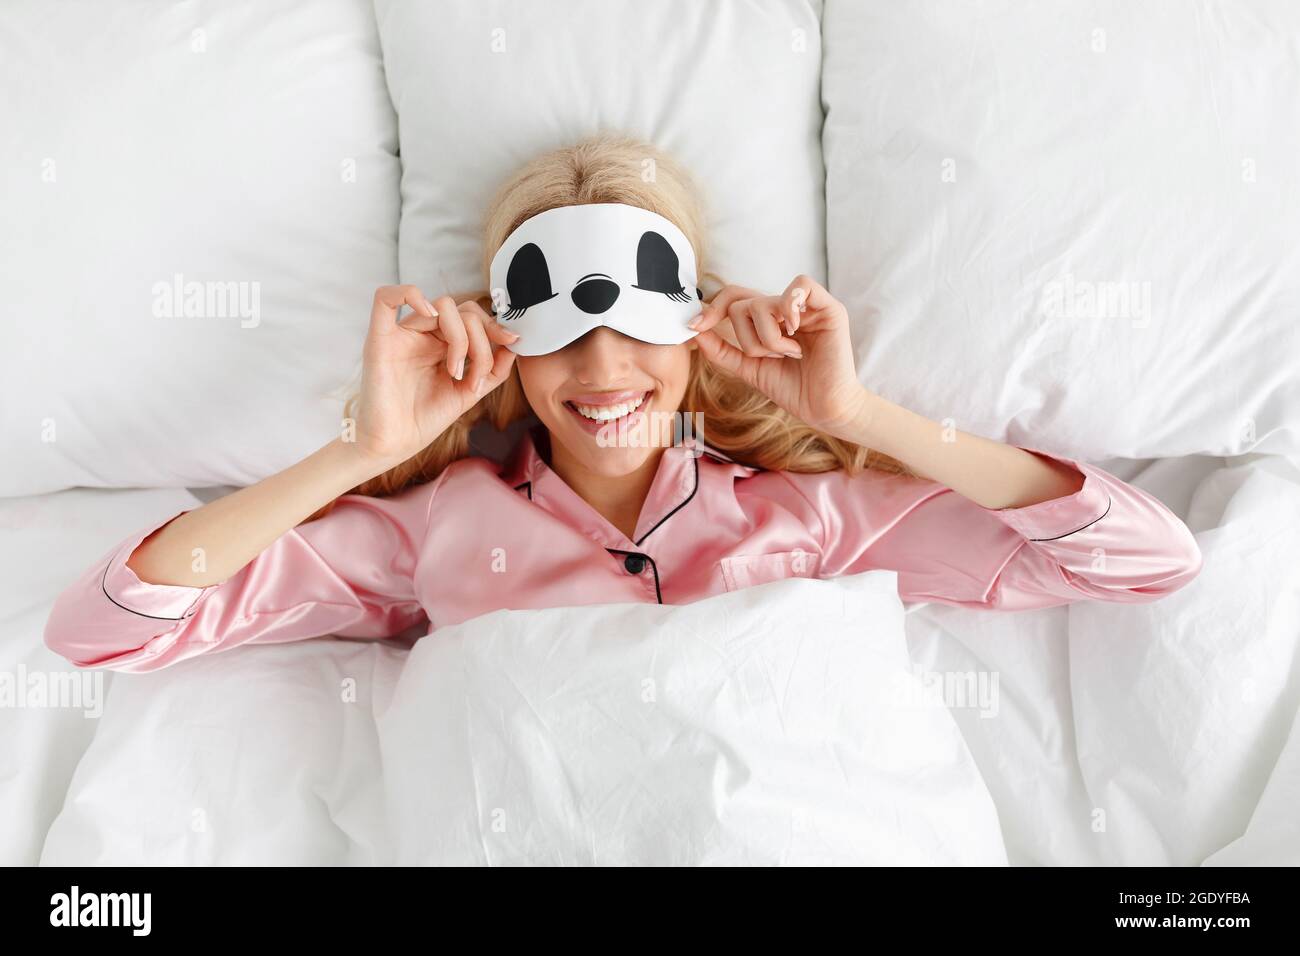 Great healthy sleep, good morning and wake up in excellent mood Stock Photo